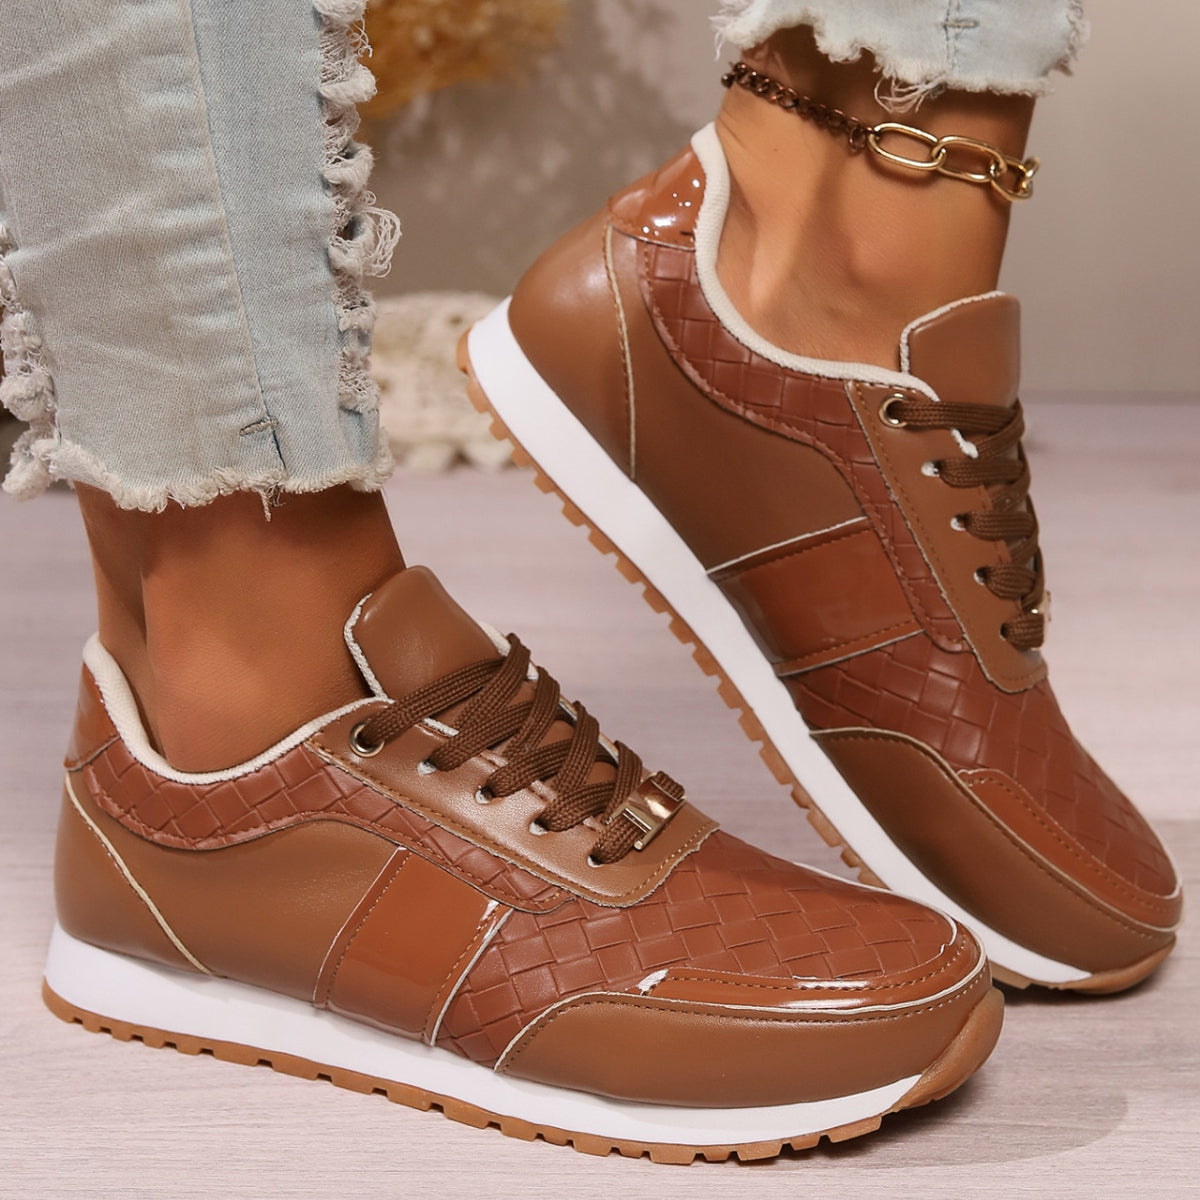 Lace-Up PU Leather Sneakers